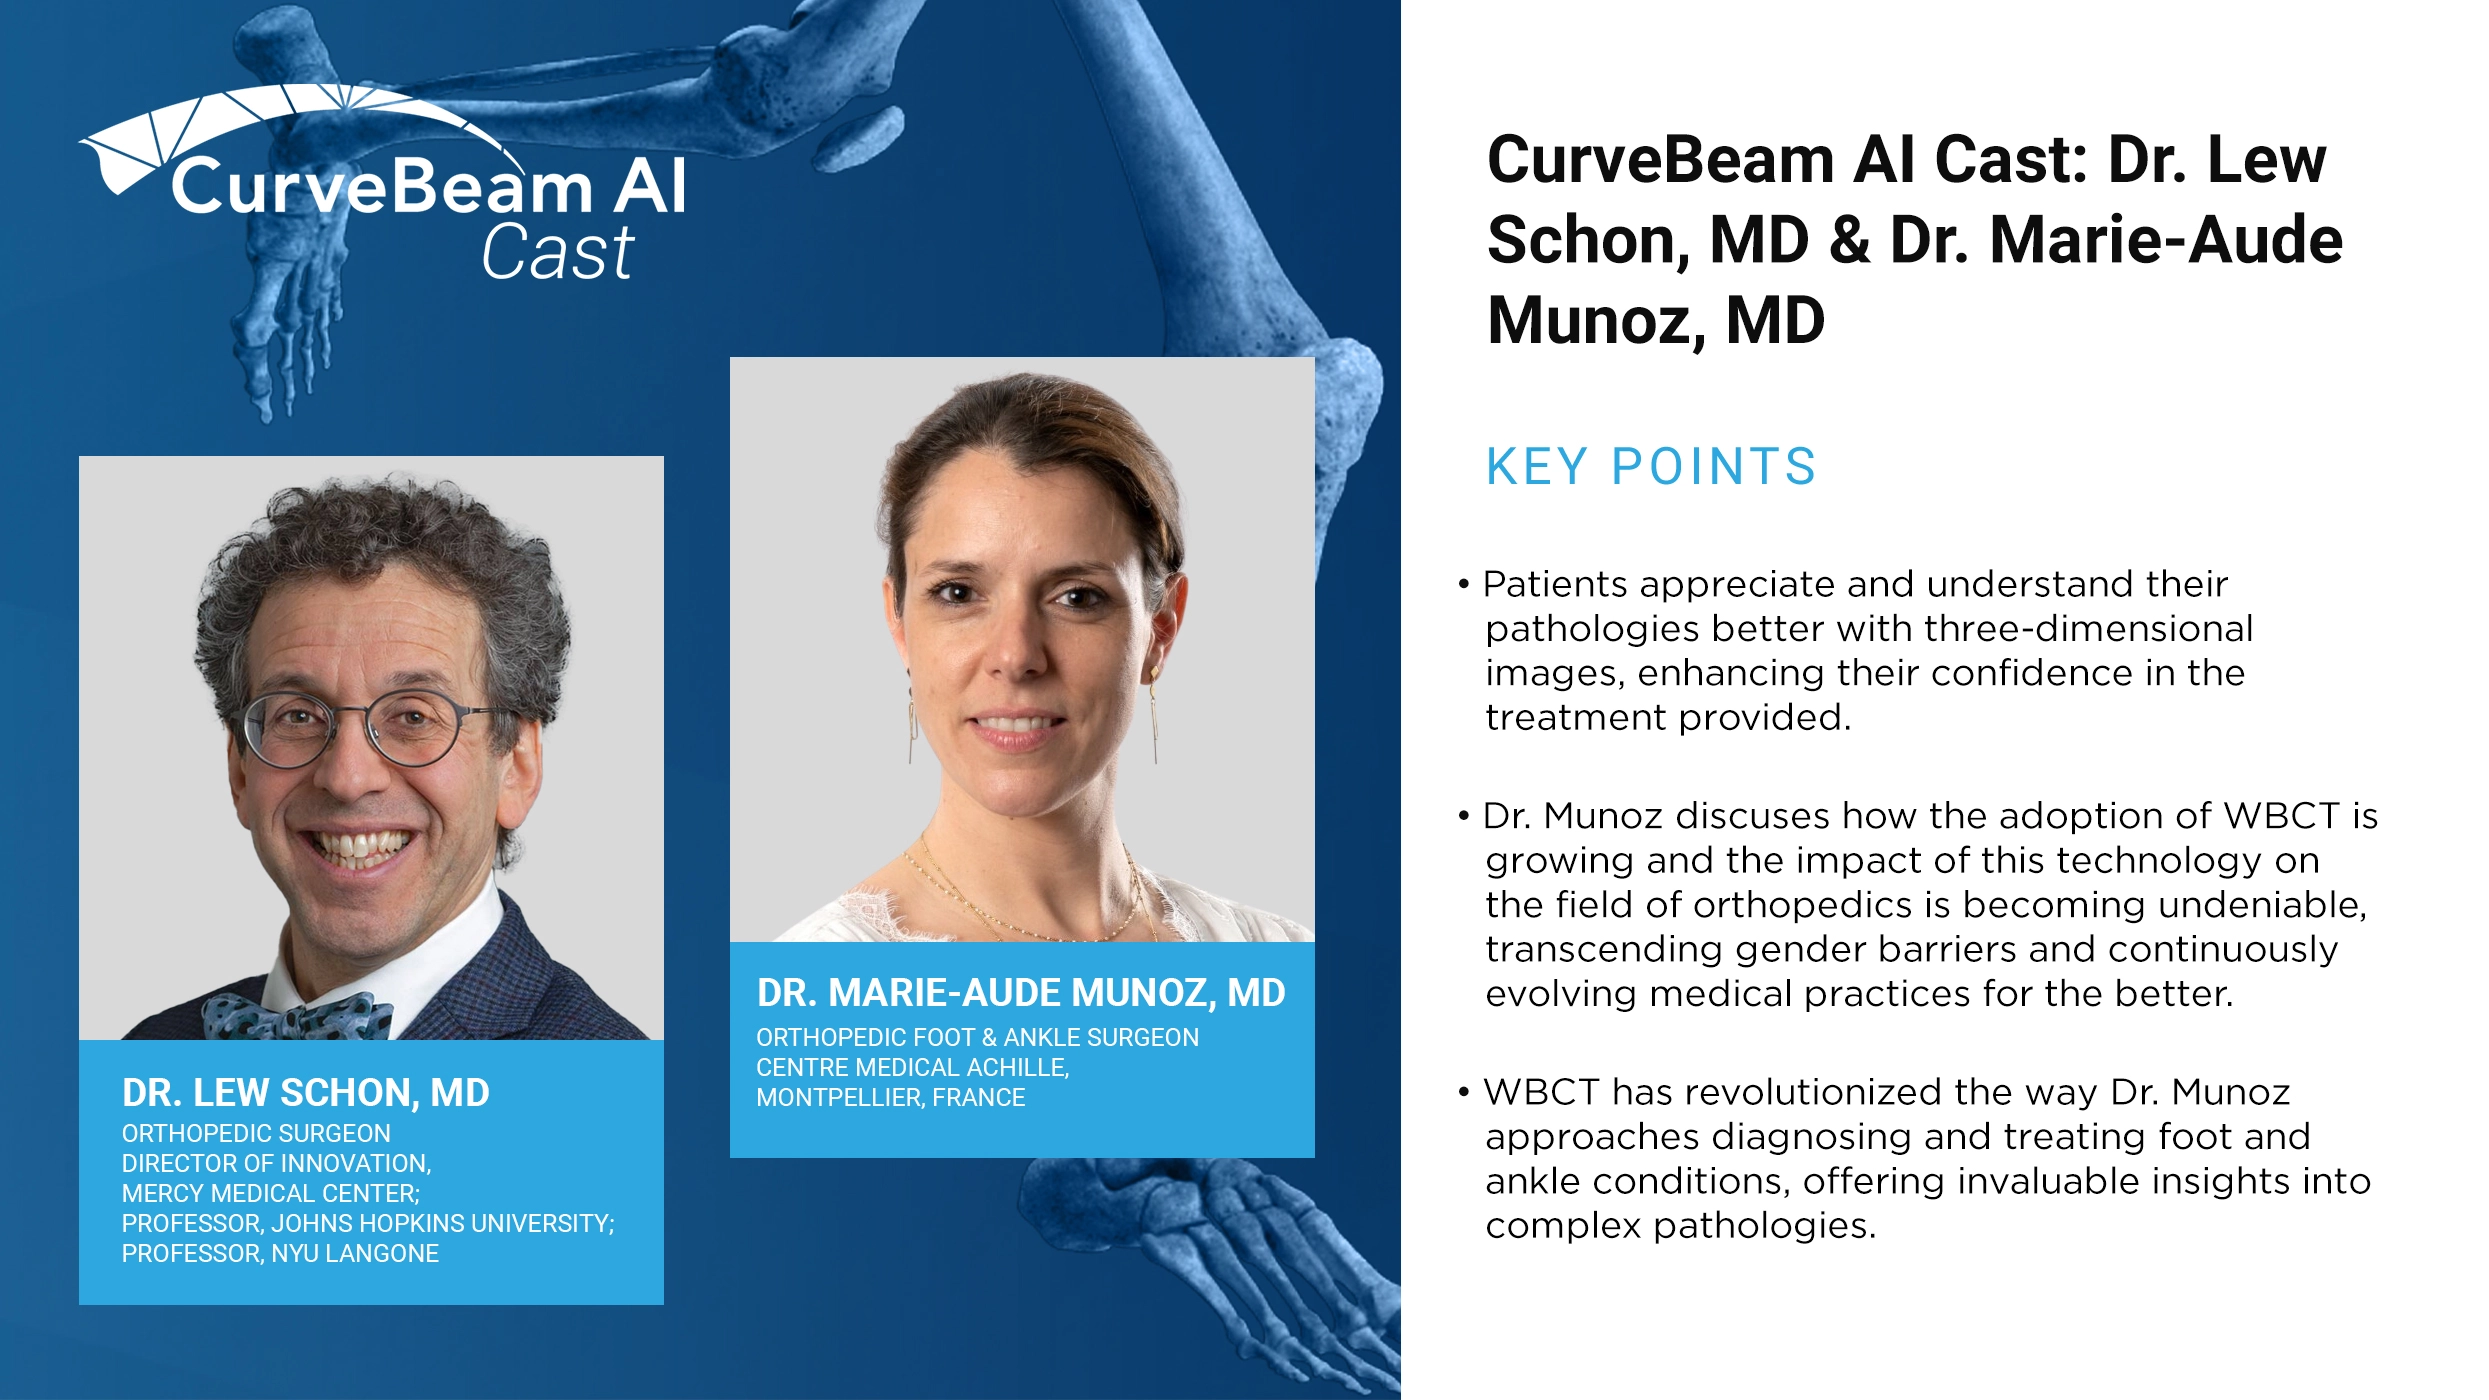 CurveBeam AI Cast: An Entrepreneurial Physician in France Opens a Weight Bearing CT-Centered Private Clinic